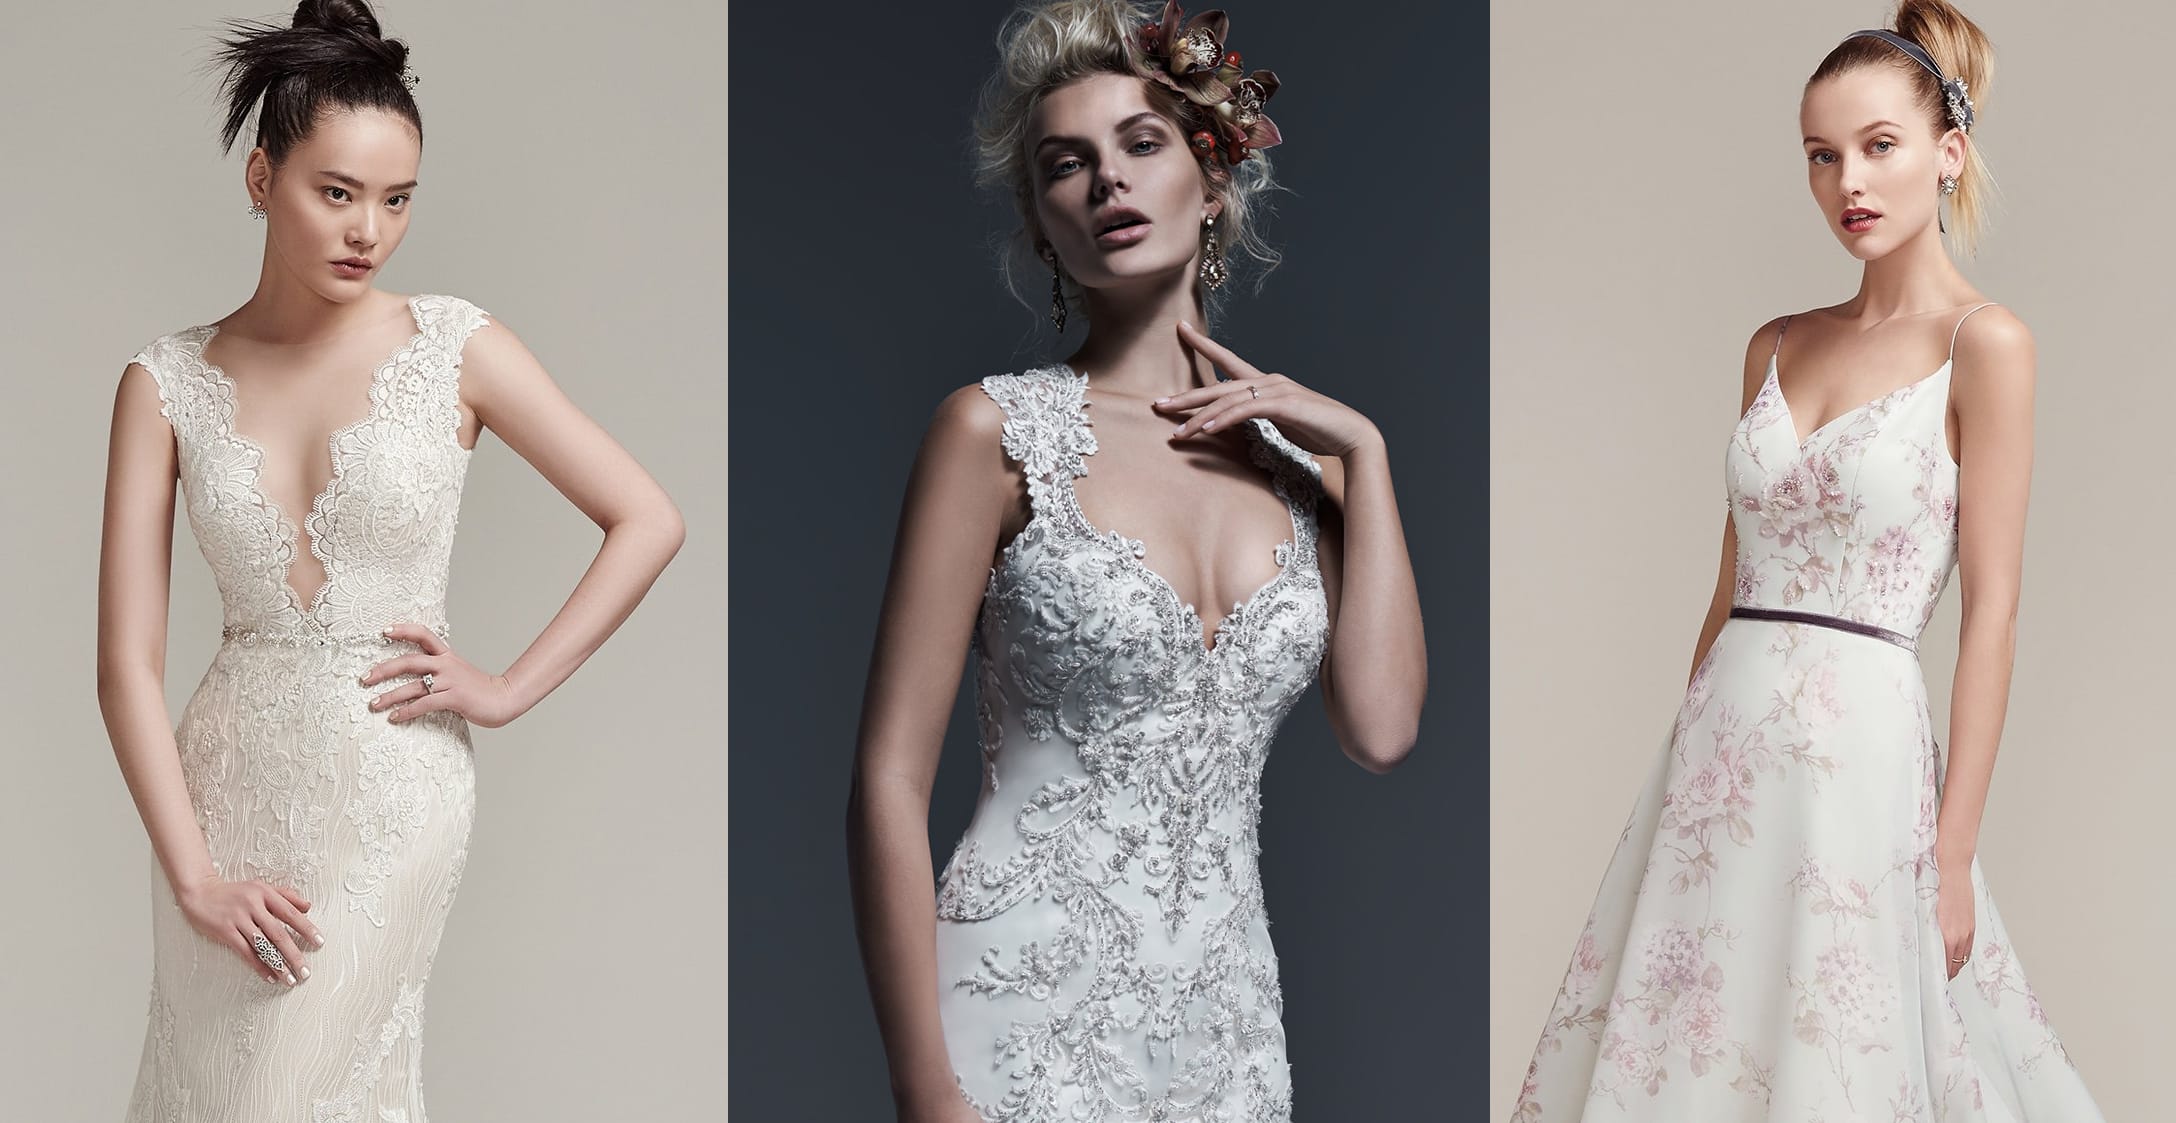 Show-stopping wedding dresses by Sottero and Midgley